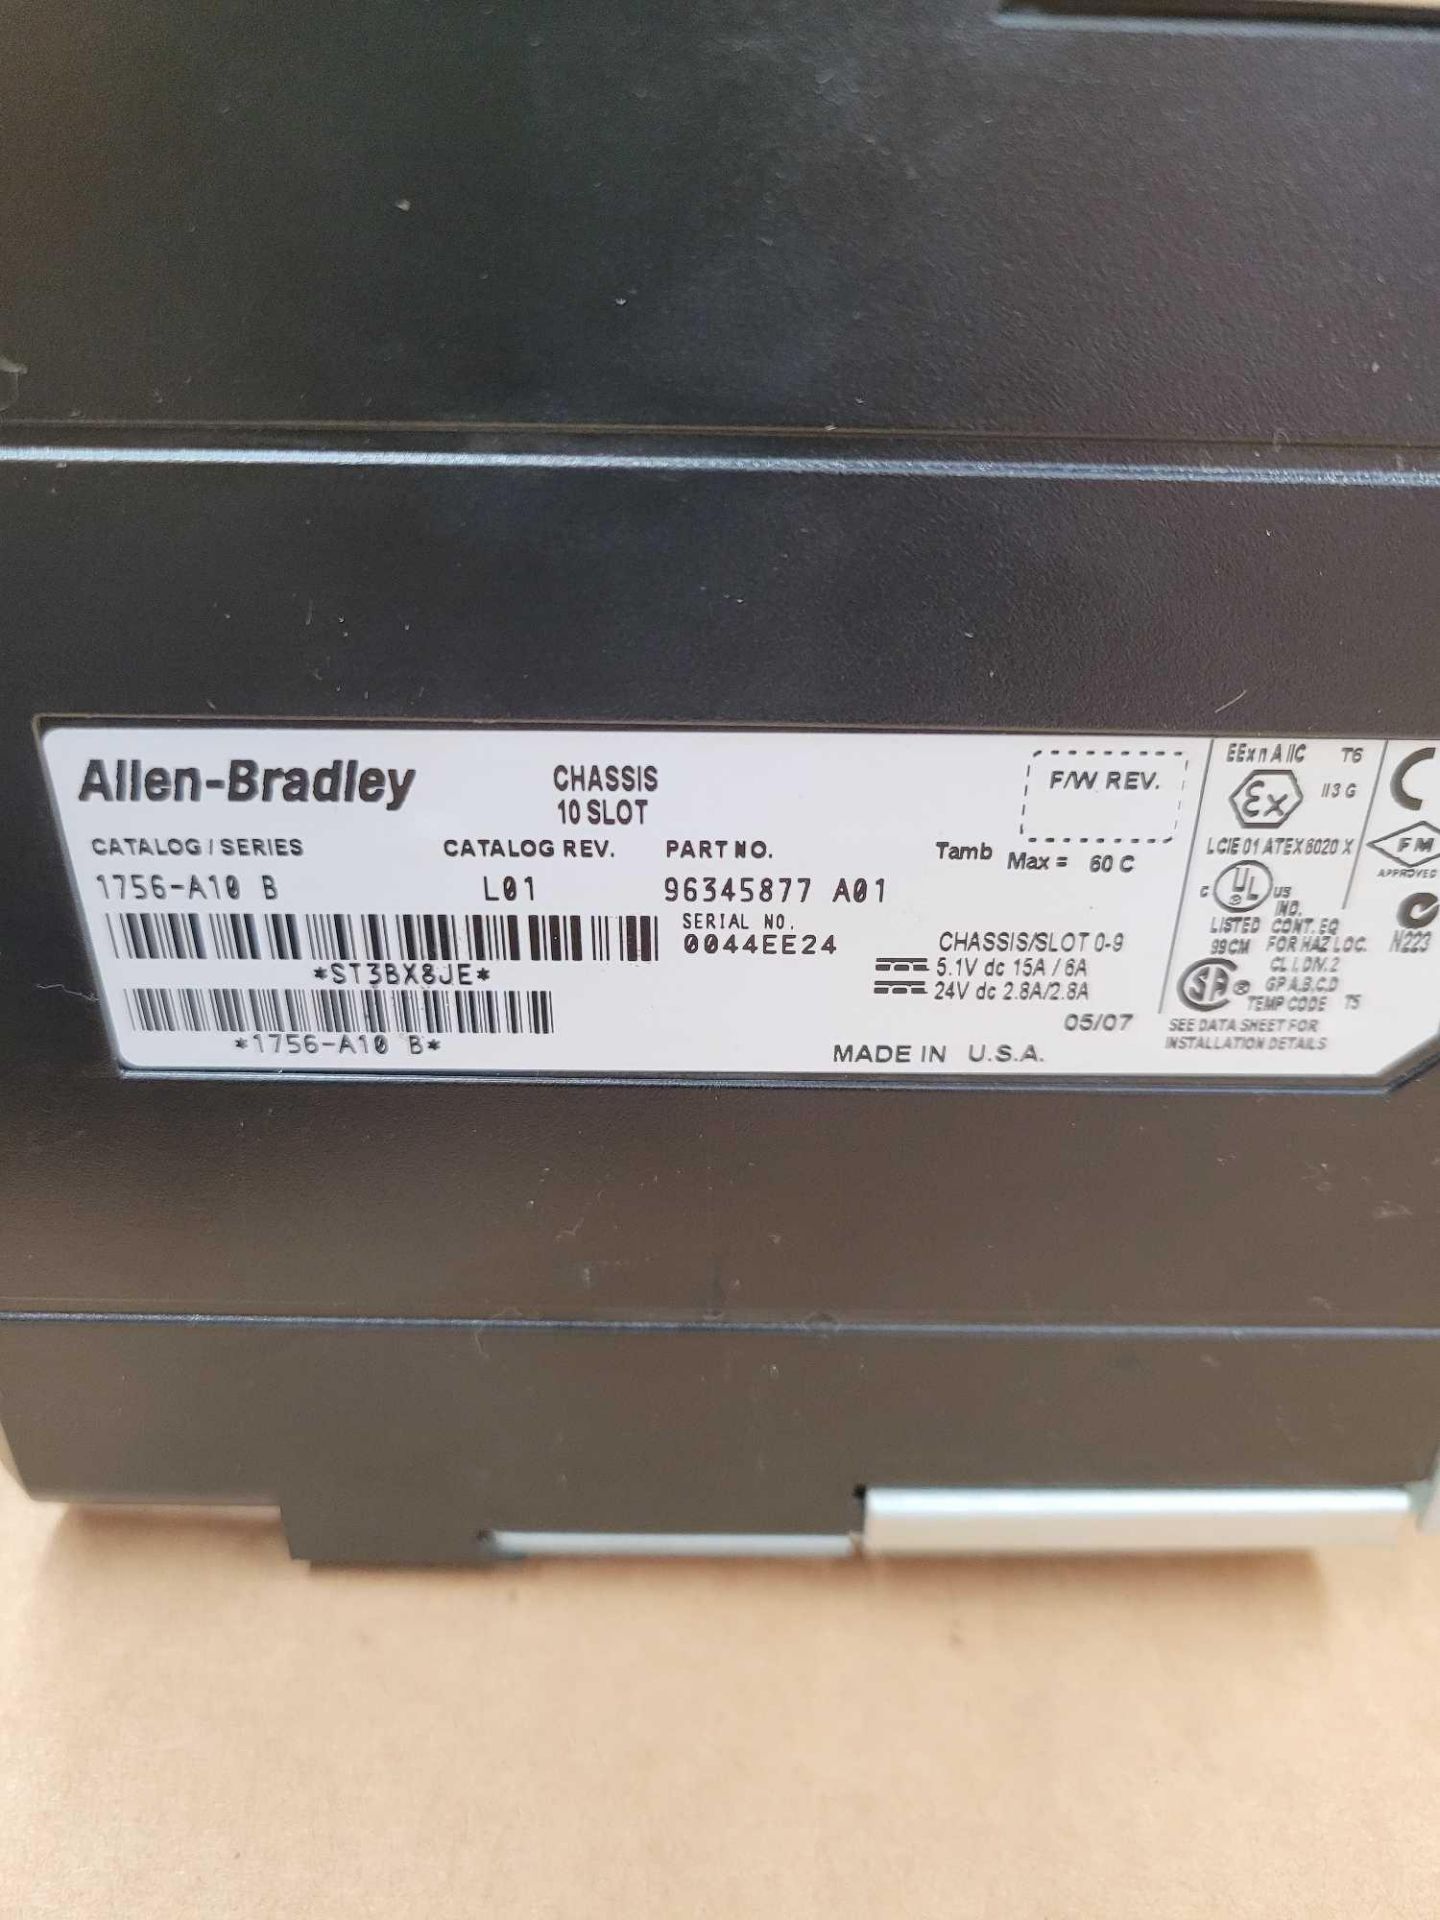 ALLEN BRADLEY 1756-PA75 with 1756-A10 / Series B ControlLogix Power Supply with Series B 10 Slot PLC - Image 9 of 9